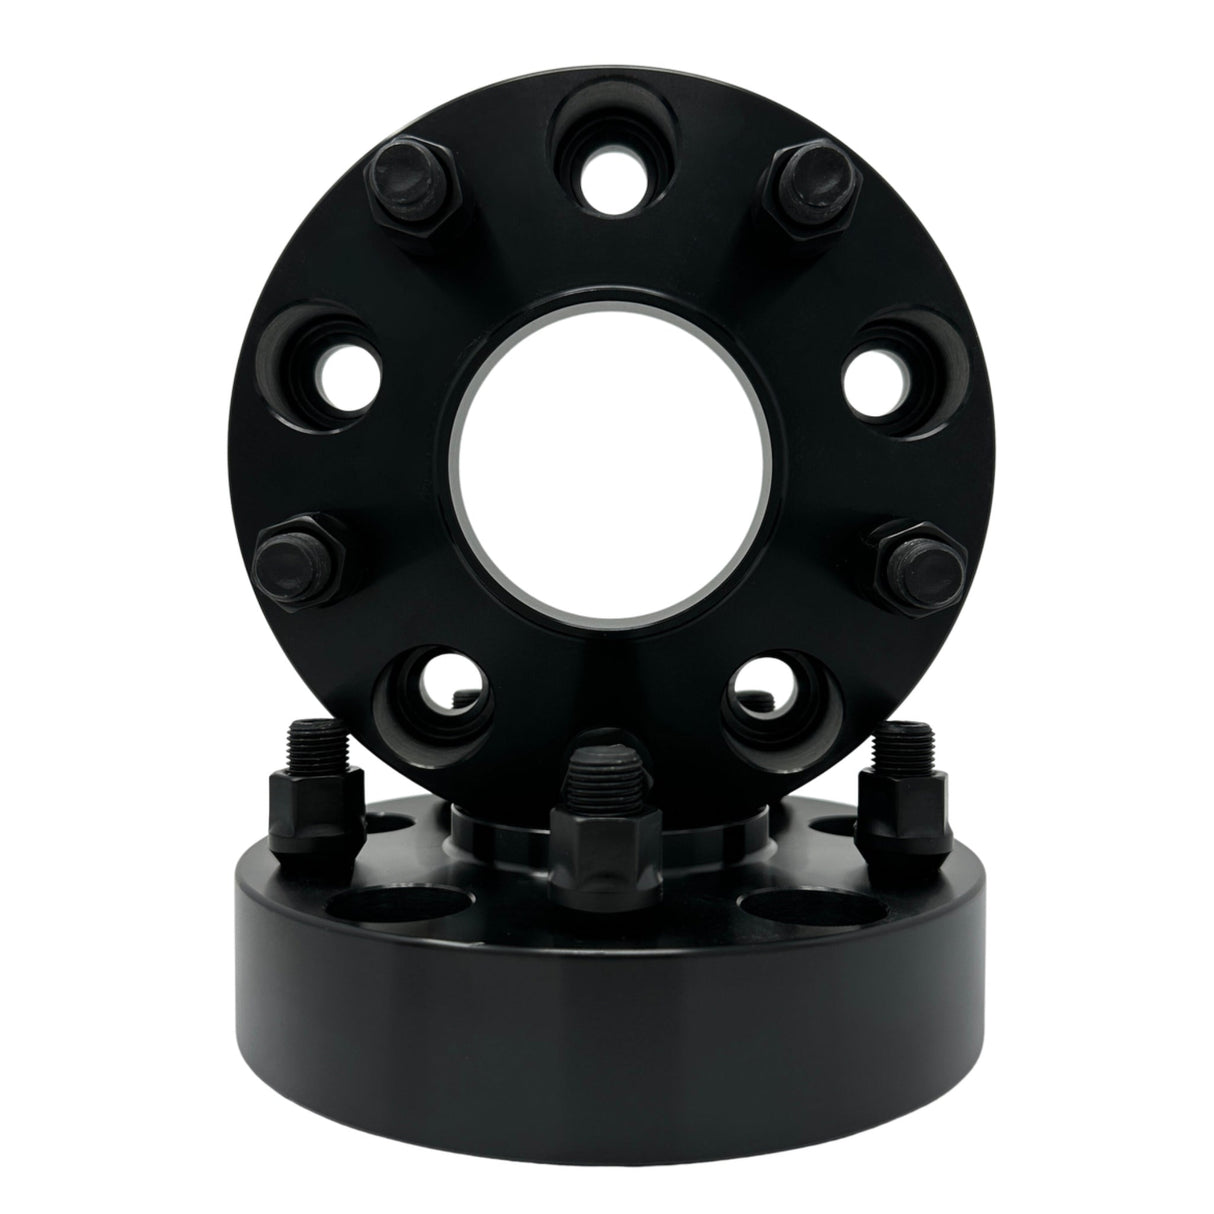 5x5.5 Hub Centric Wheel Spacers | 9/16"-18 Studs & Lug Nuts | 77.8mm Center Bore With Centering Lip 1" Inch, 1.25" Inch, 1.5" Inch, 2" Inch